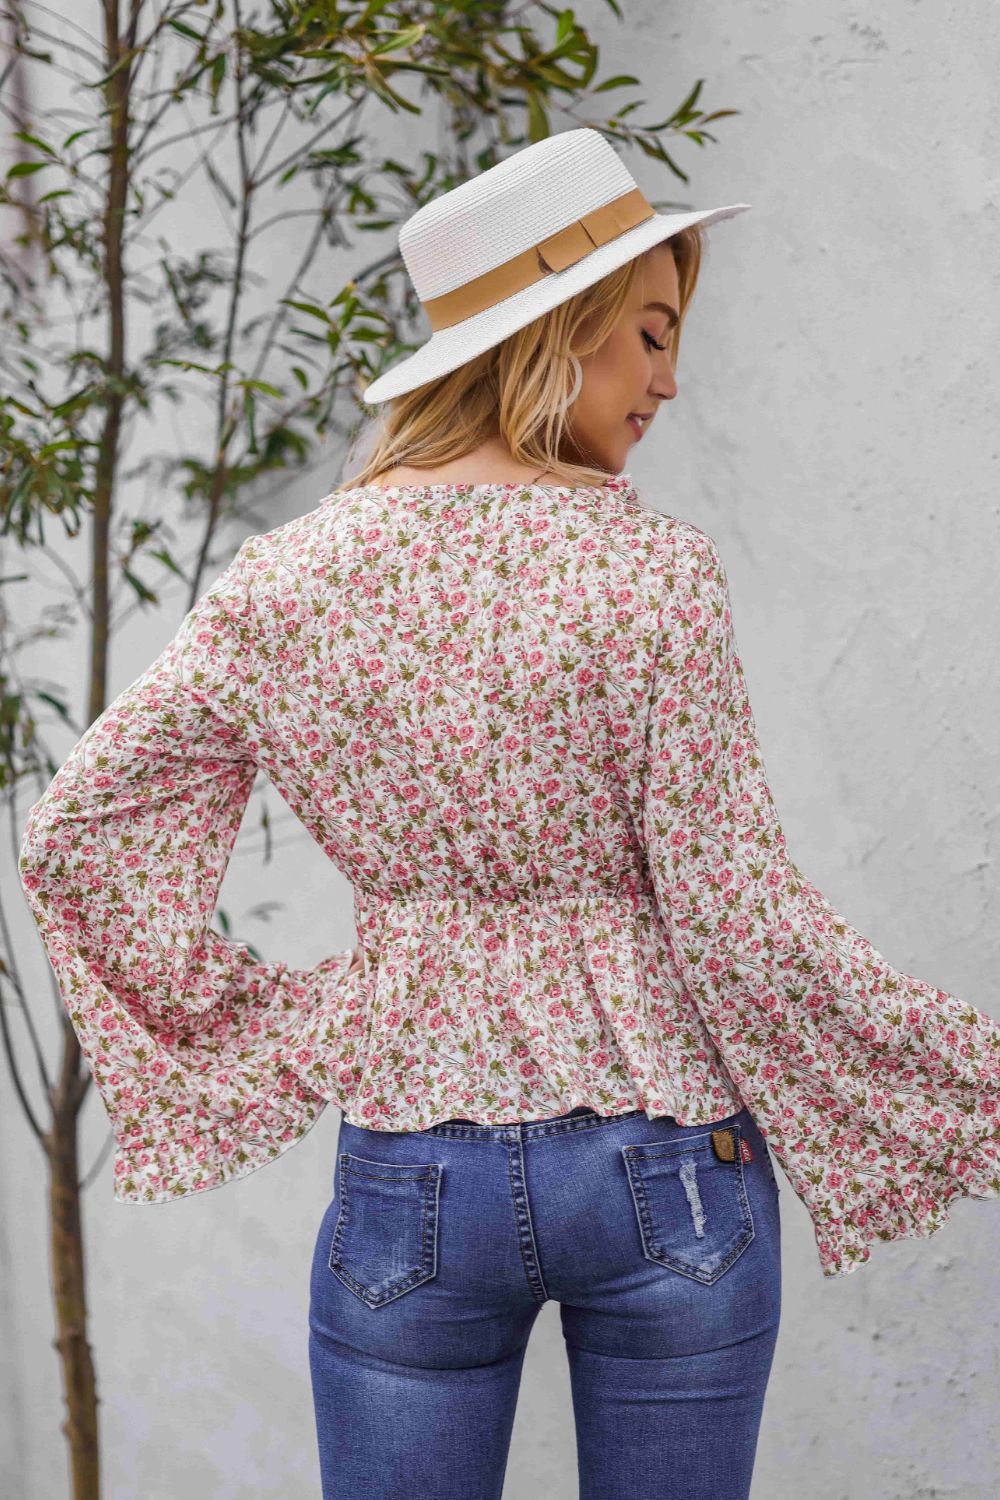 Floral Peplum Blouse with Ruffled V-Neck